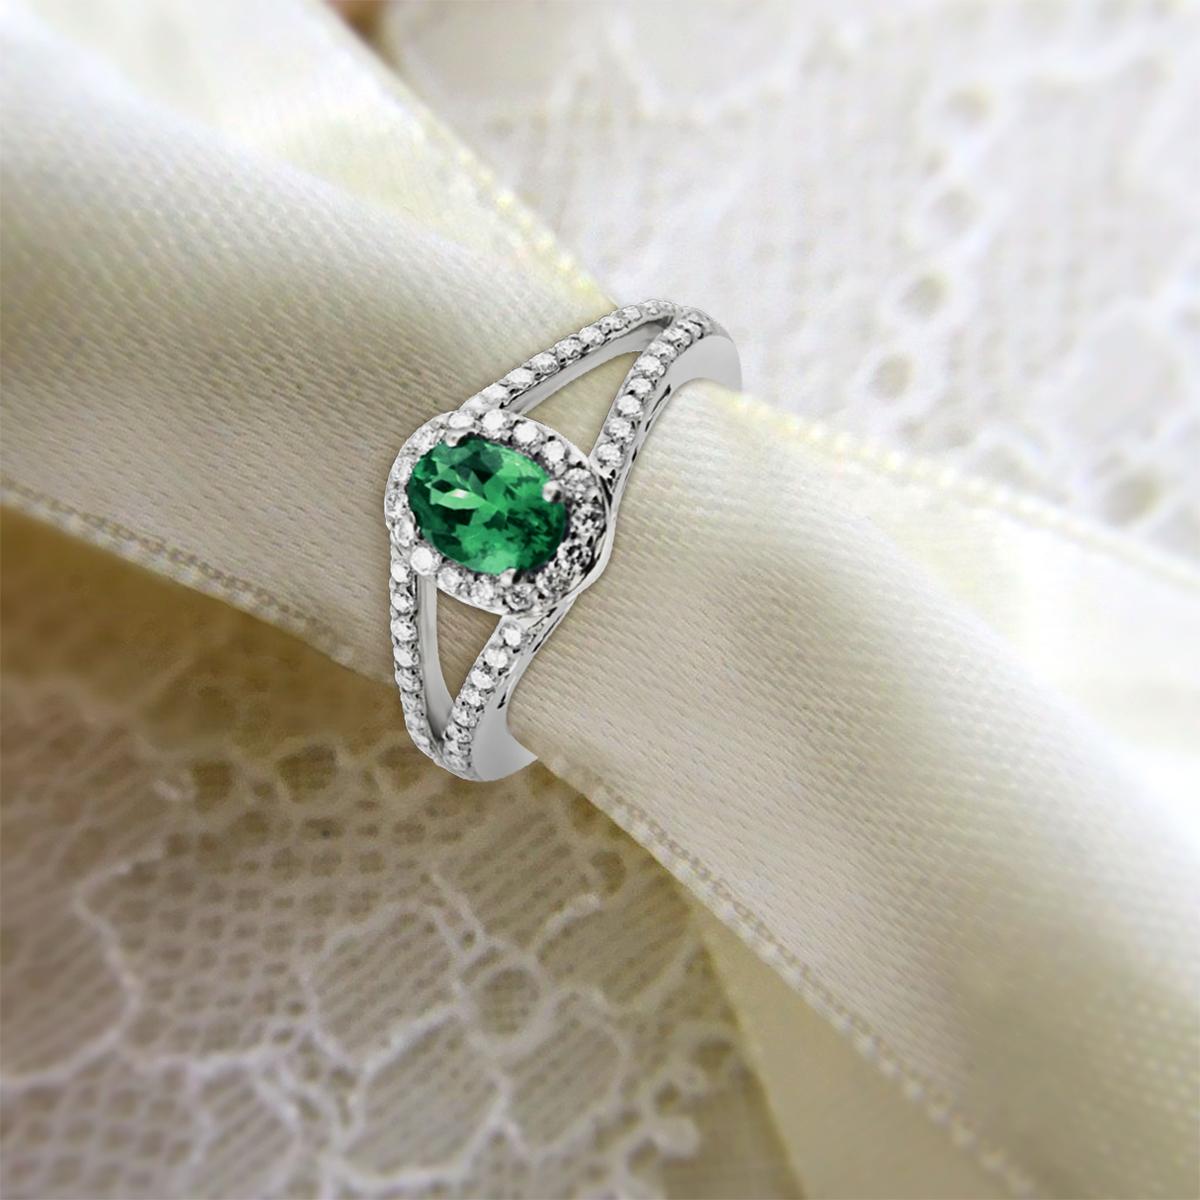 Modern 18K White Gold 0.64cts Emerald and Diamond Ring, Style# R2192